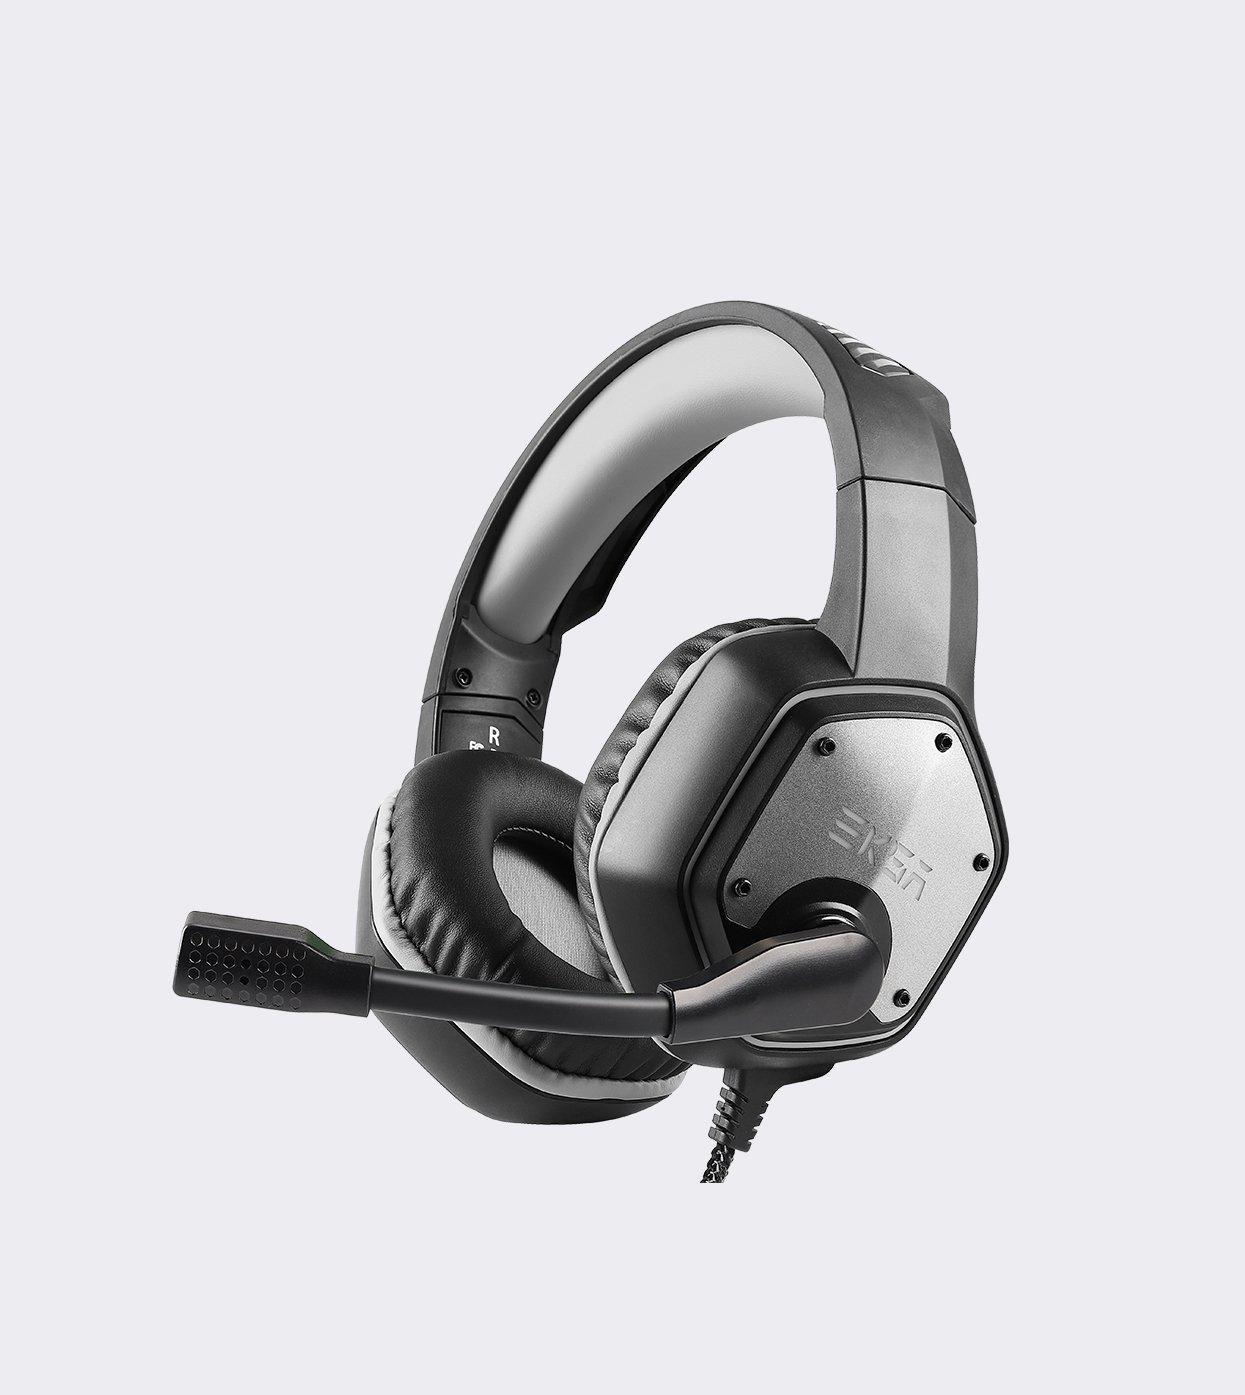 Fnatic React Gaming Headset for Esports with 53mm Drivers, Metal Frame,  Precise Stereo Sound, Broadcaster Detachable Microphone, 3.5mm Jack [PC,  PS4